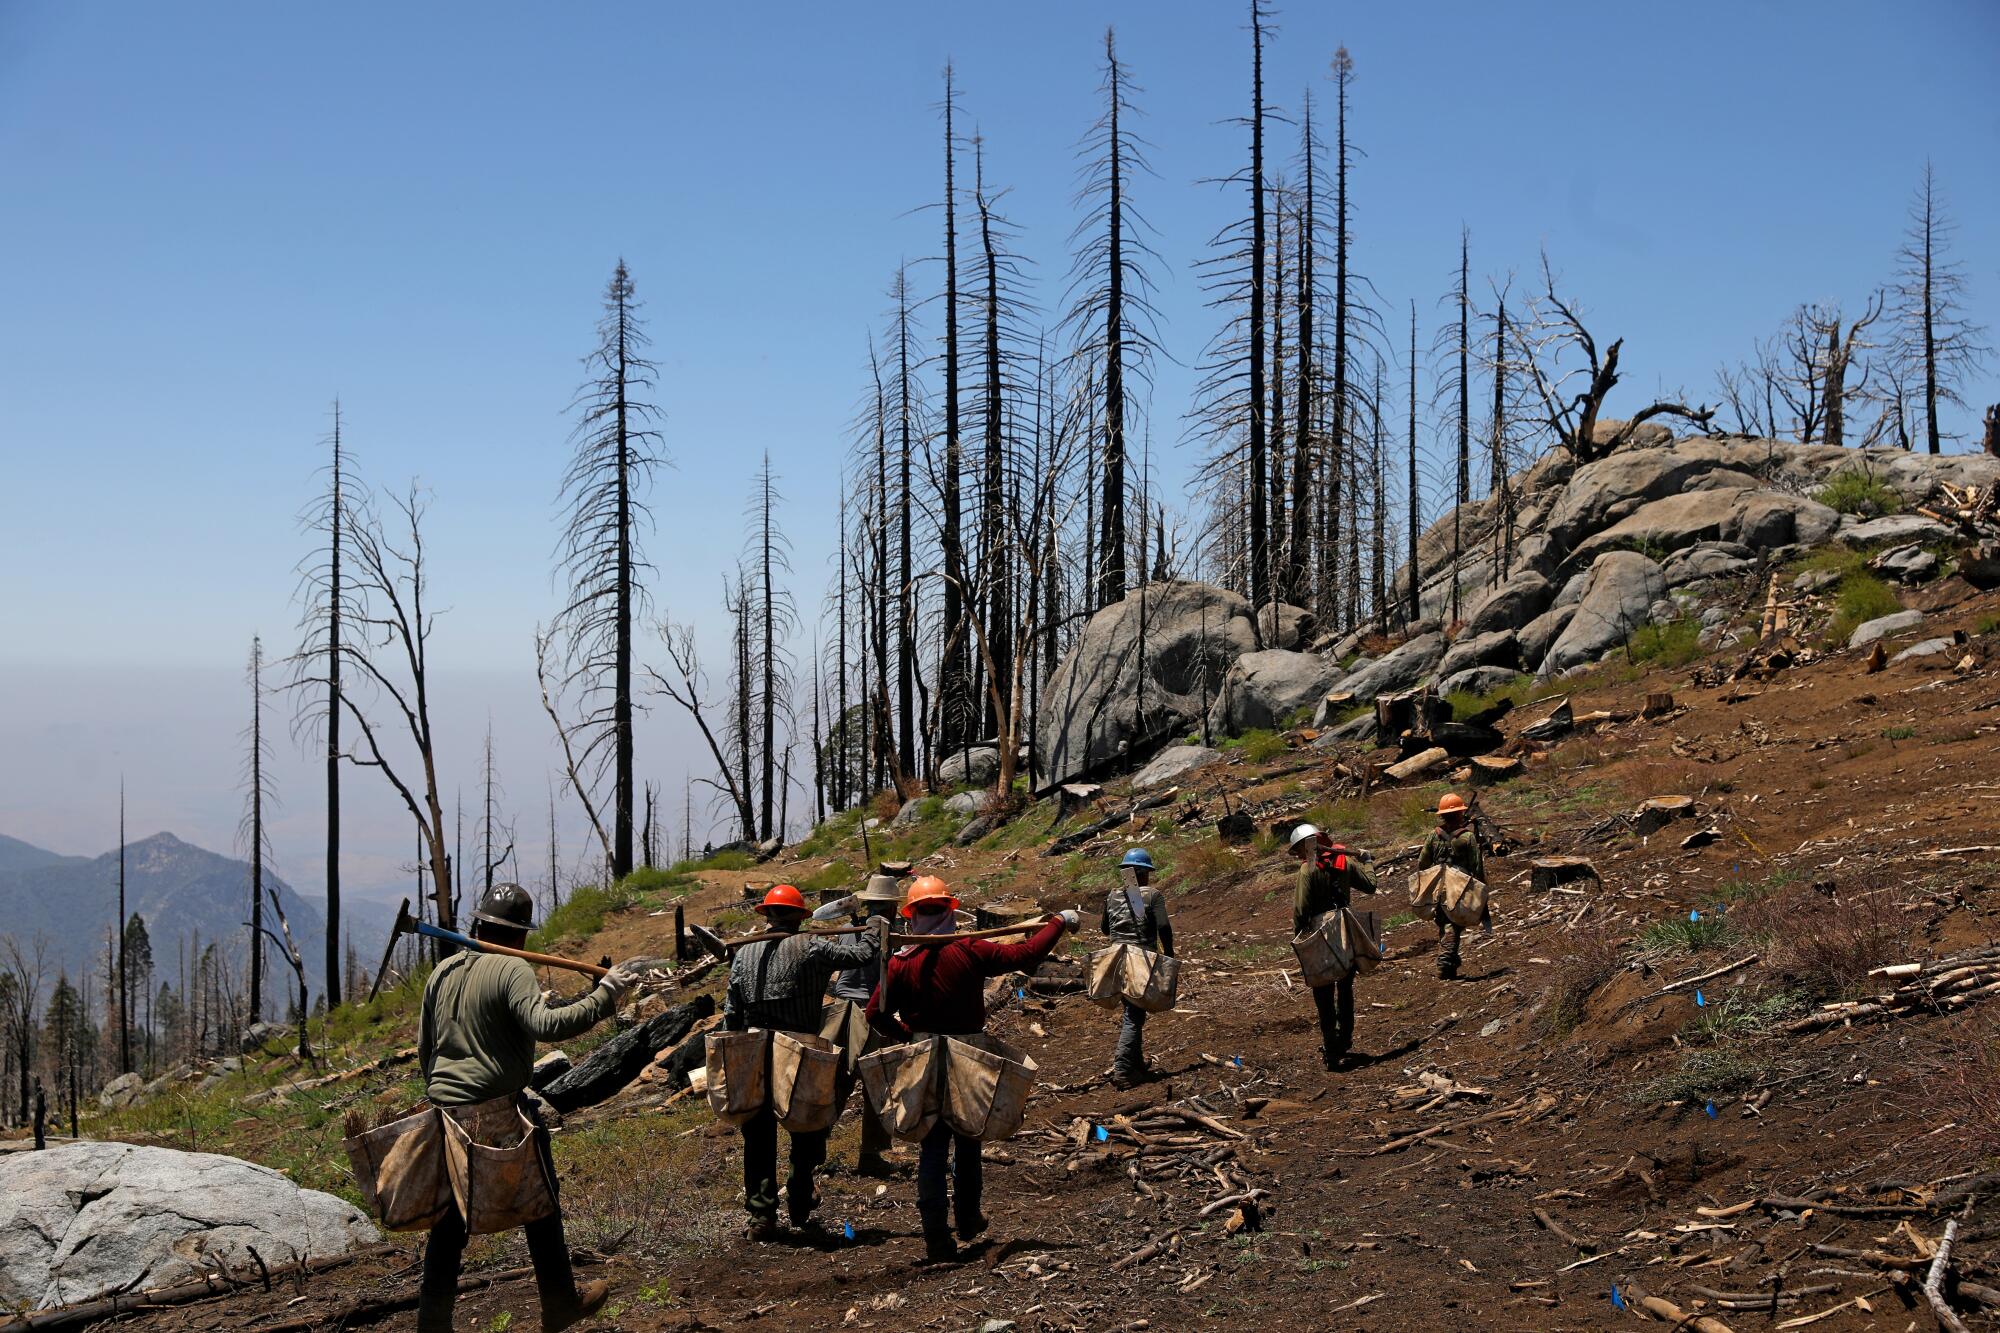 Seven people, wearing safety helmets, carrying hoe dags and sacks, walk toward a cluster of burnt-out trees on a hill.